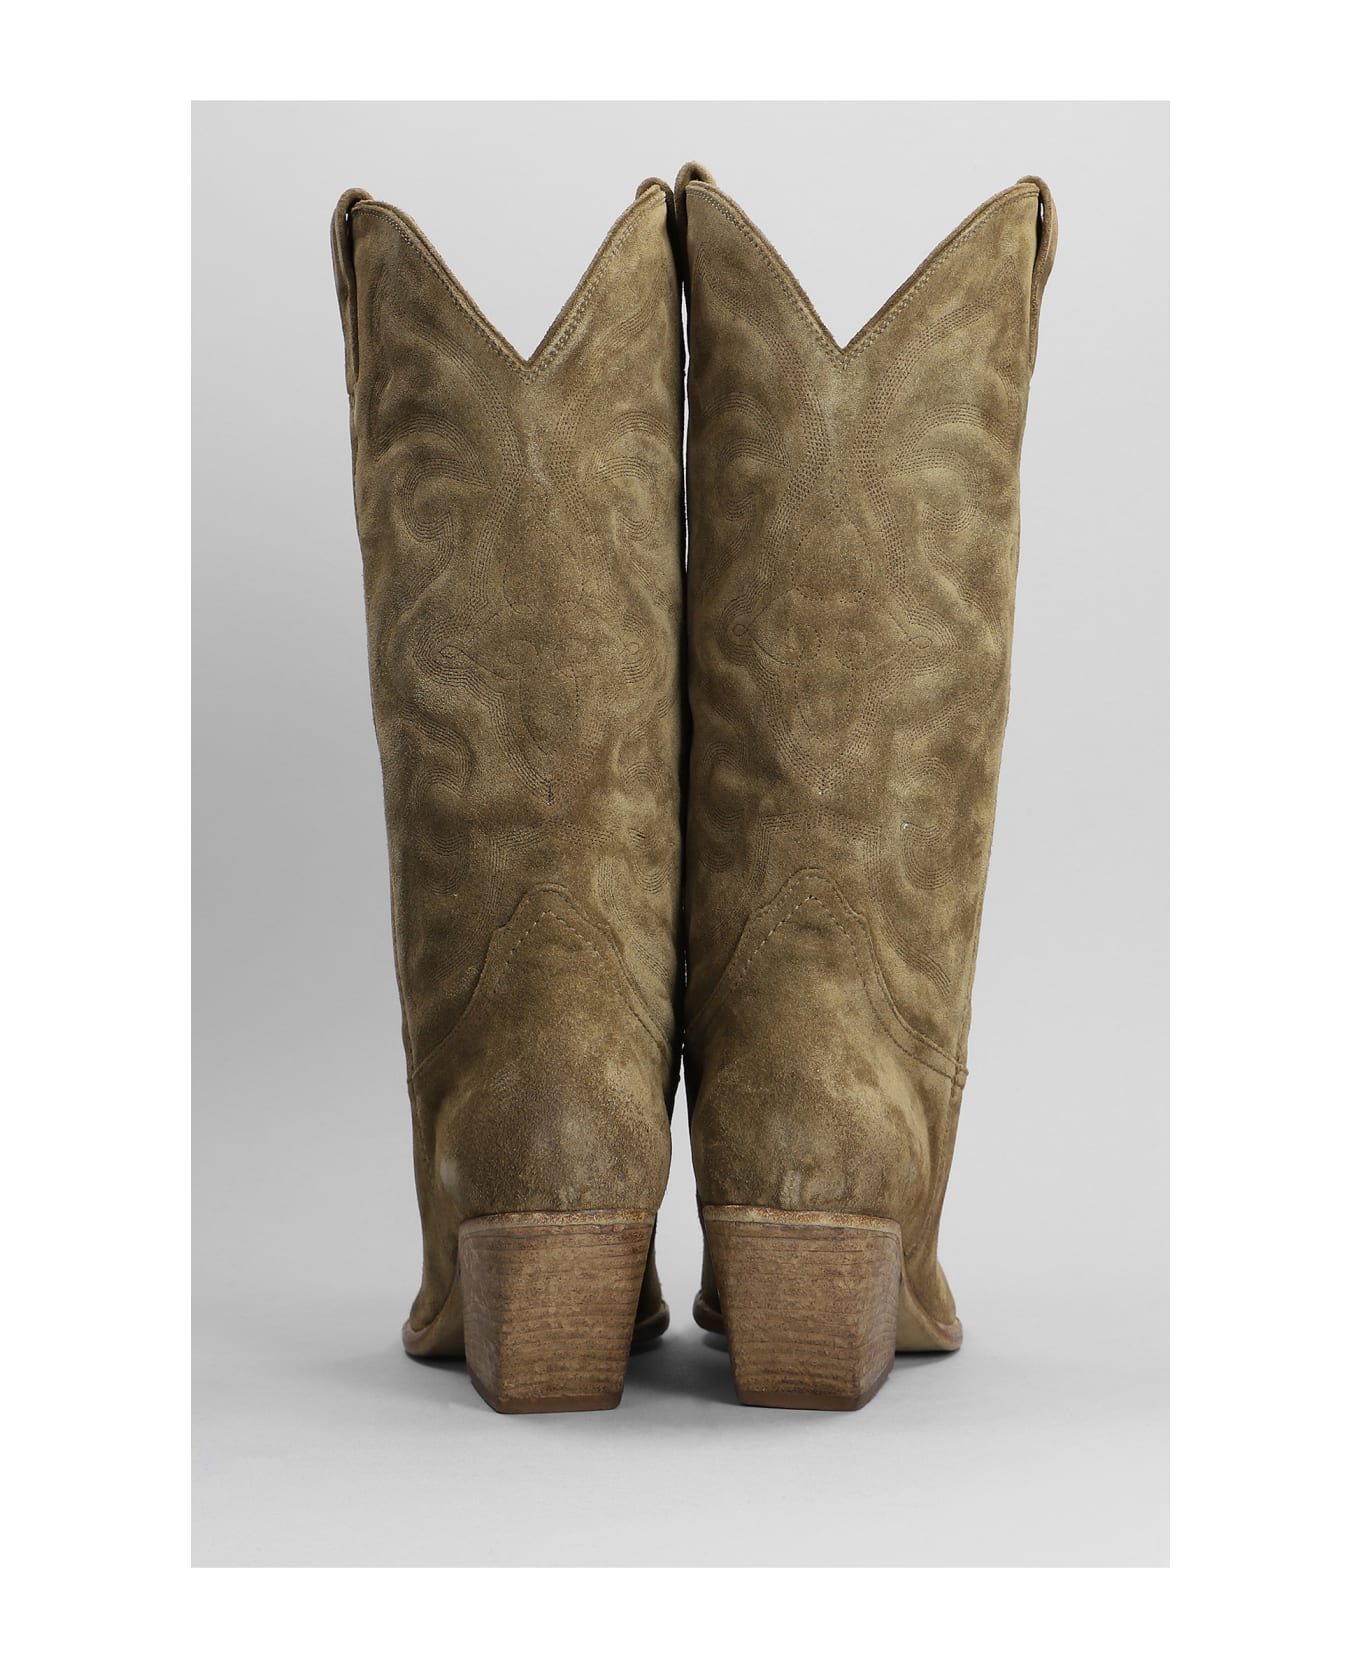 Elena Iachi Texan Boots In Taupe Suede - taupe ブーツ